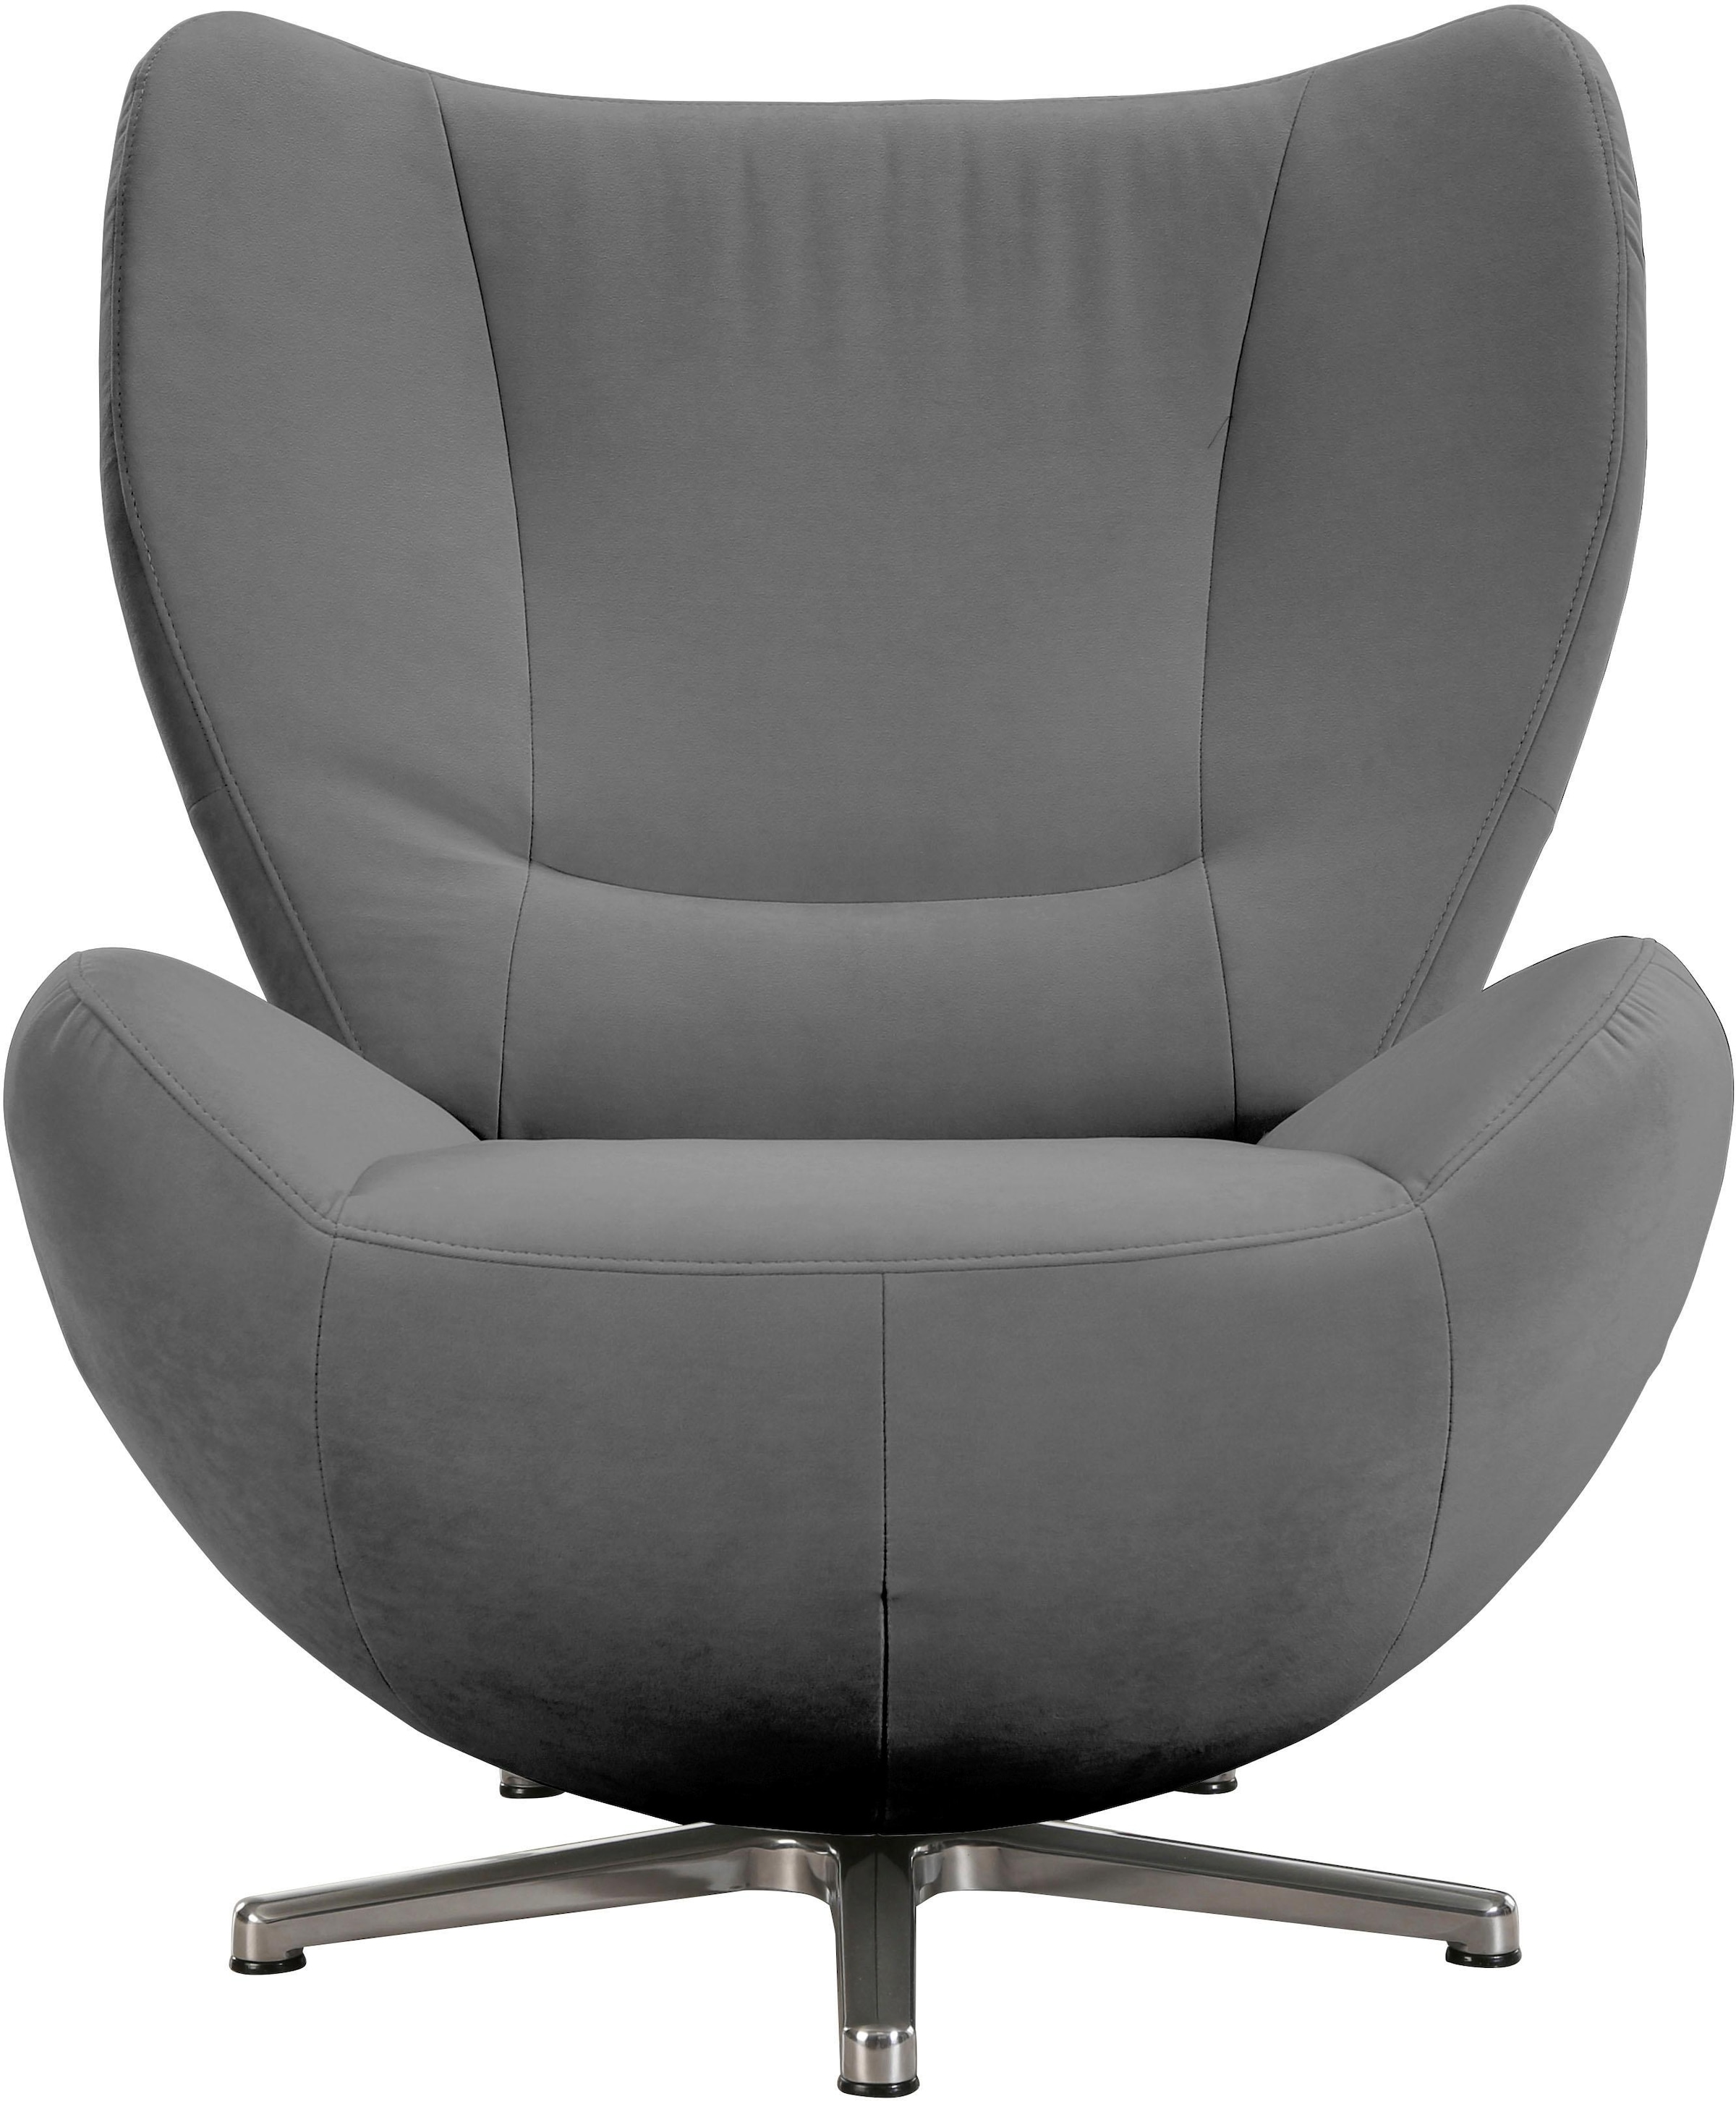 Loungesessel Chrom BAUR »TOM PURE«, HOME | Metall-Drehfuß mit in TAILOR TOM